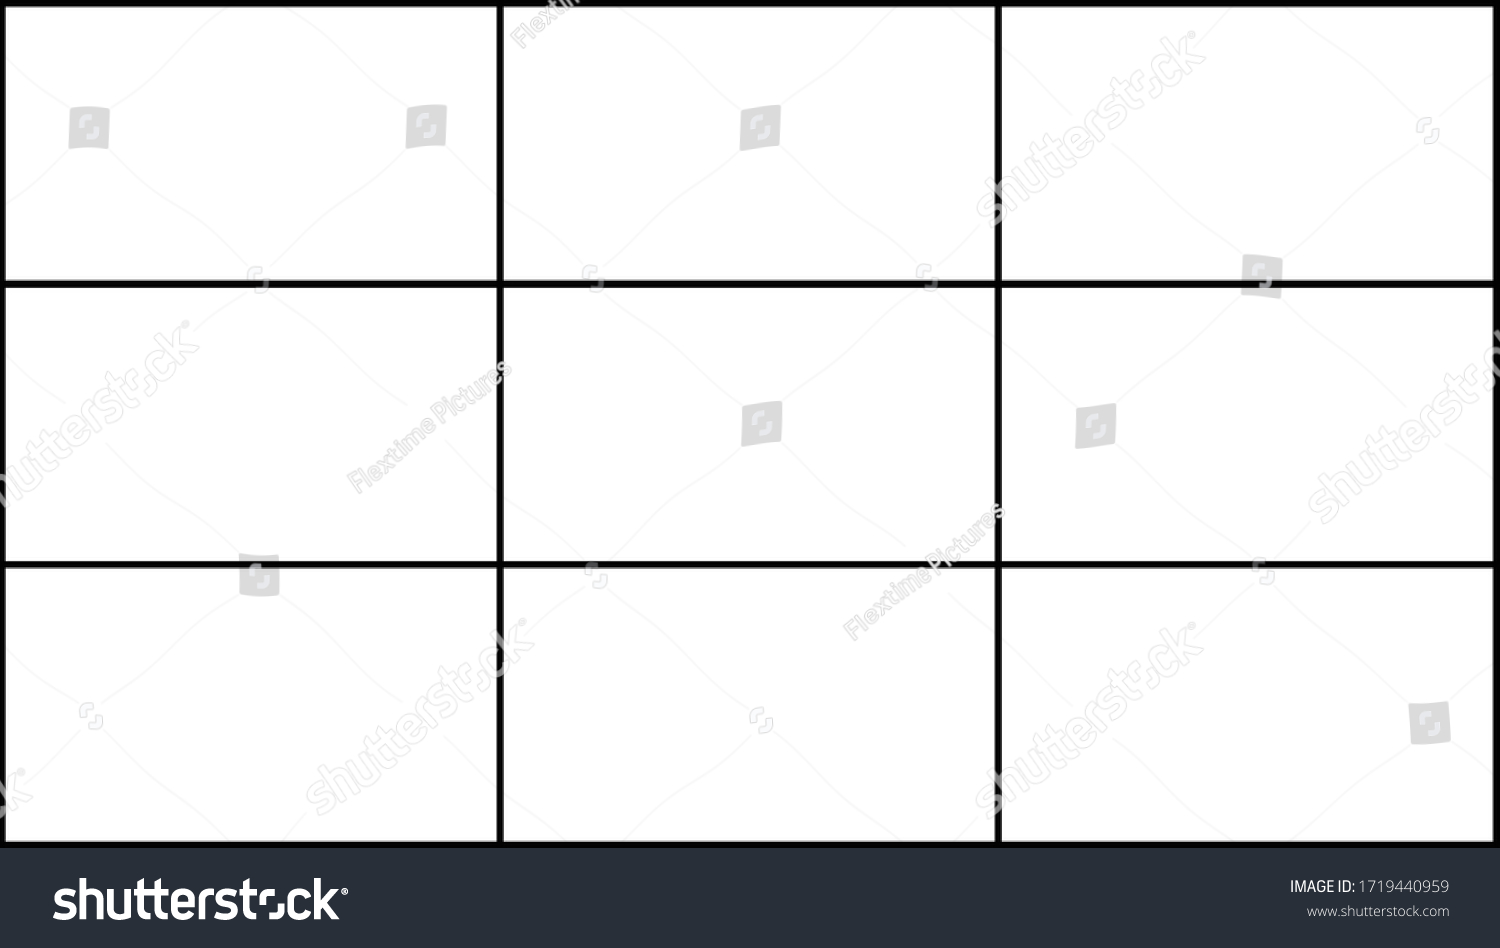 SVG of Composition Proportions guidelines set, attention spot of rule of thirds template in 16 by 9 ratio monitor display svg